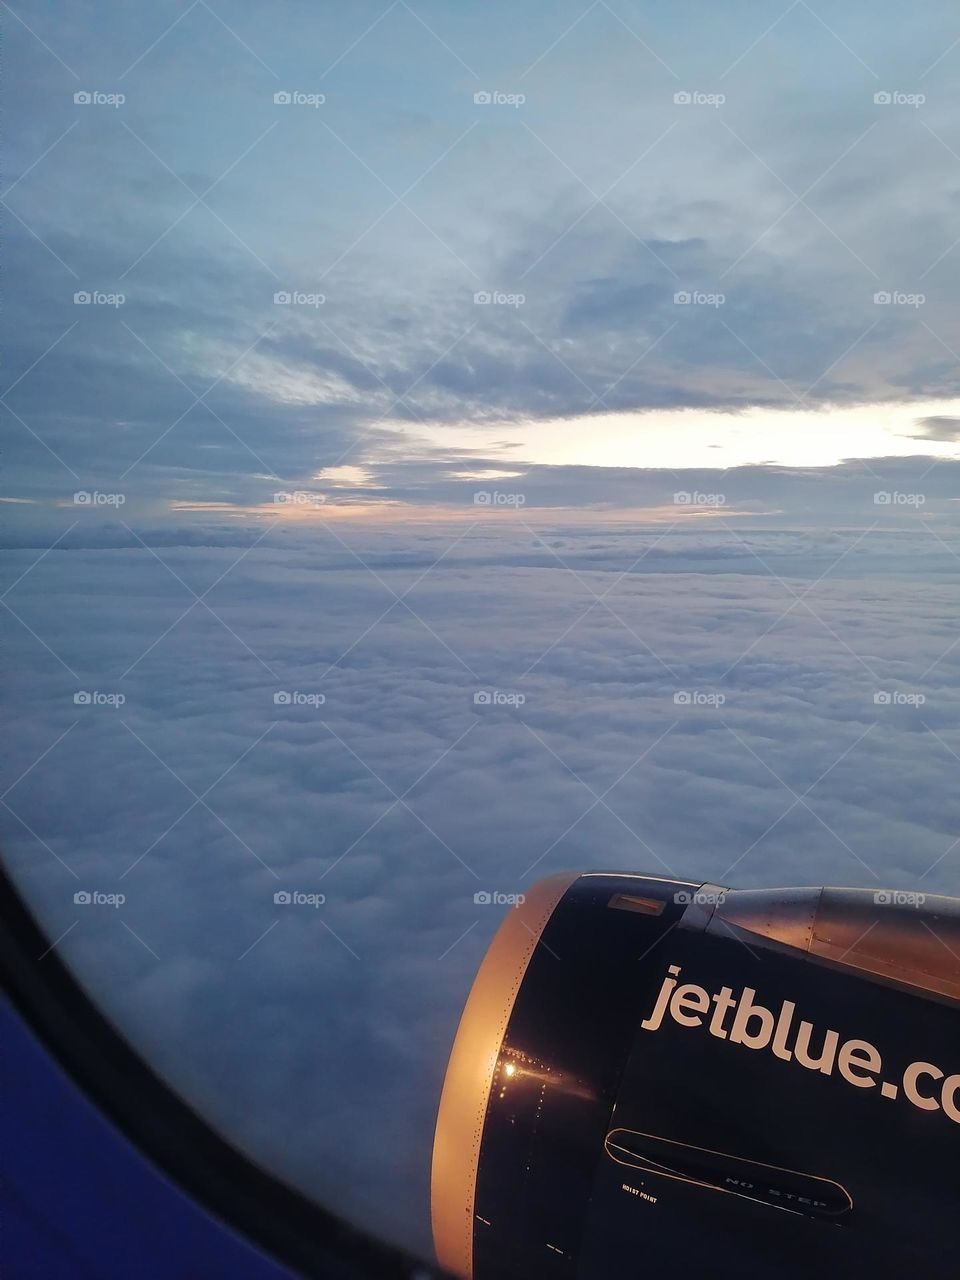 Skyview from a plane